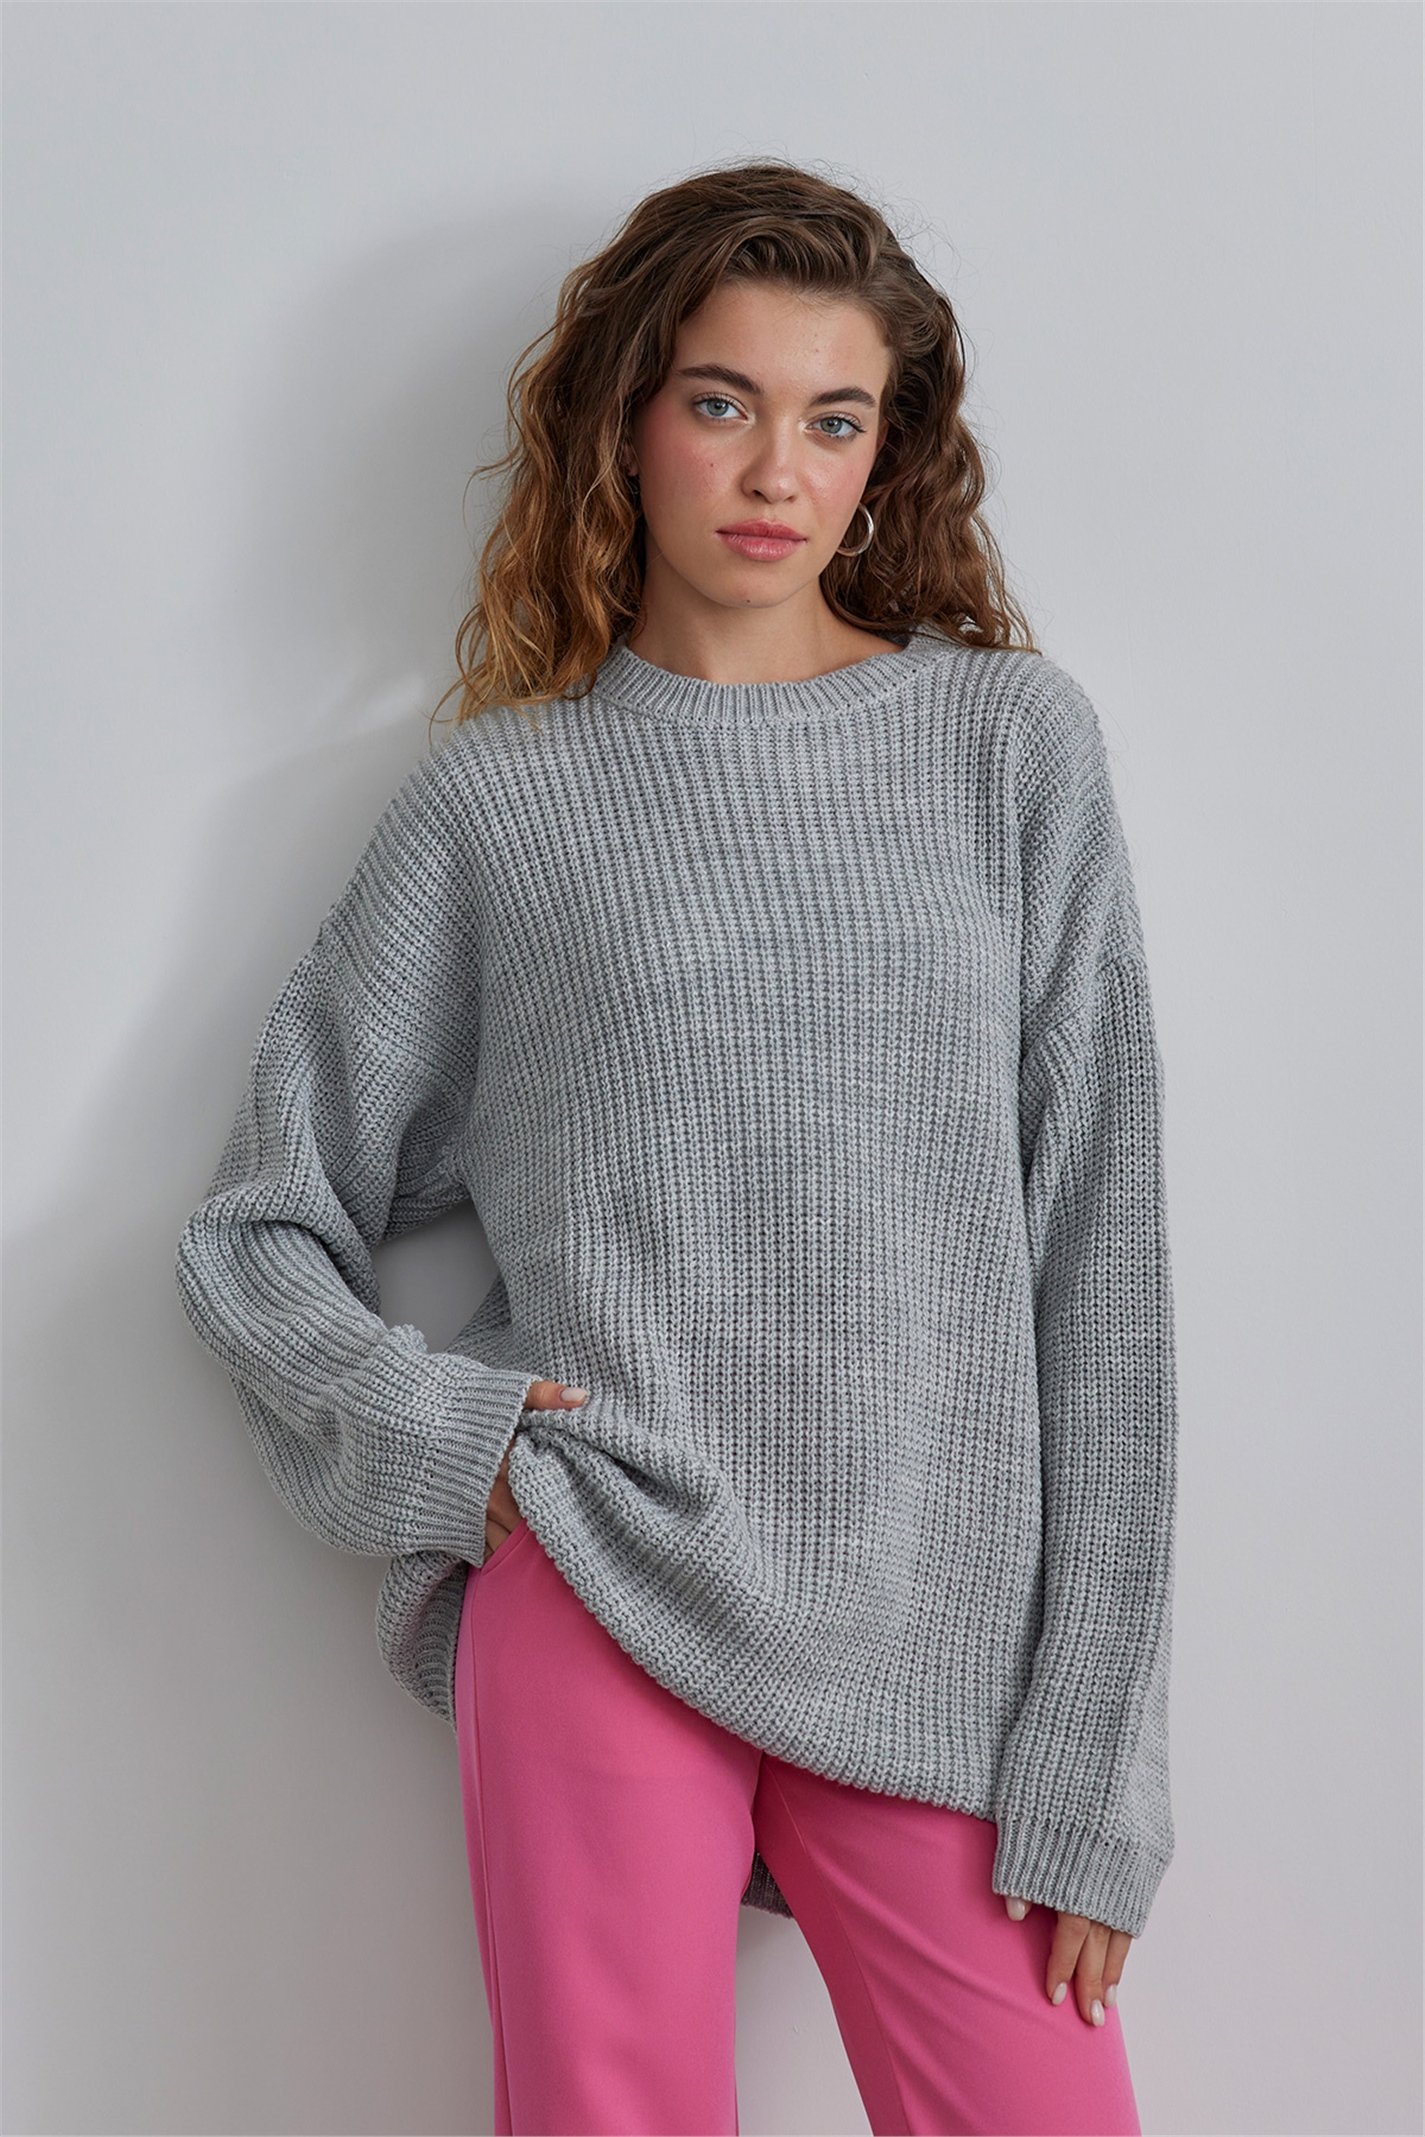 Gray Oversize Knitwear Sweater | Suud Collection